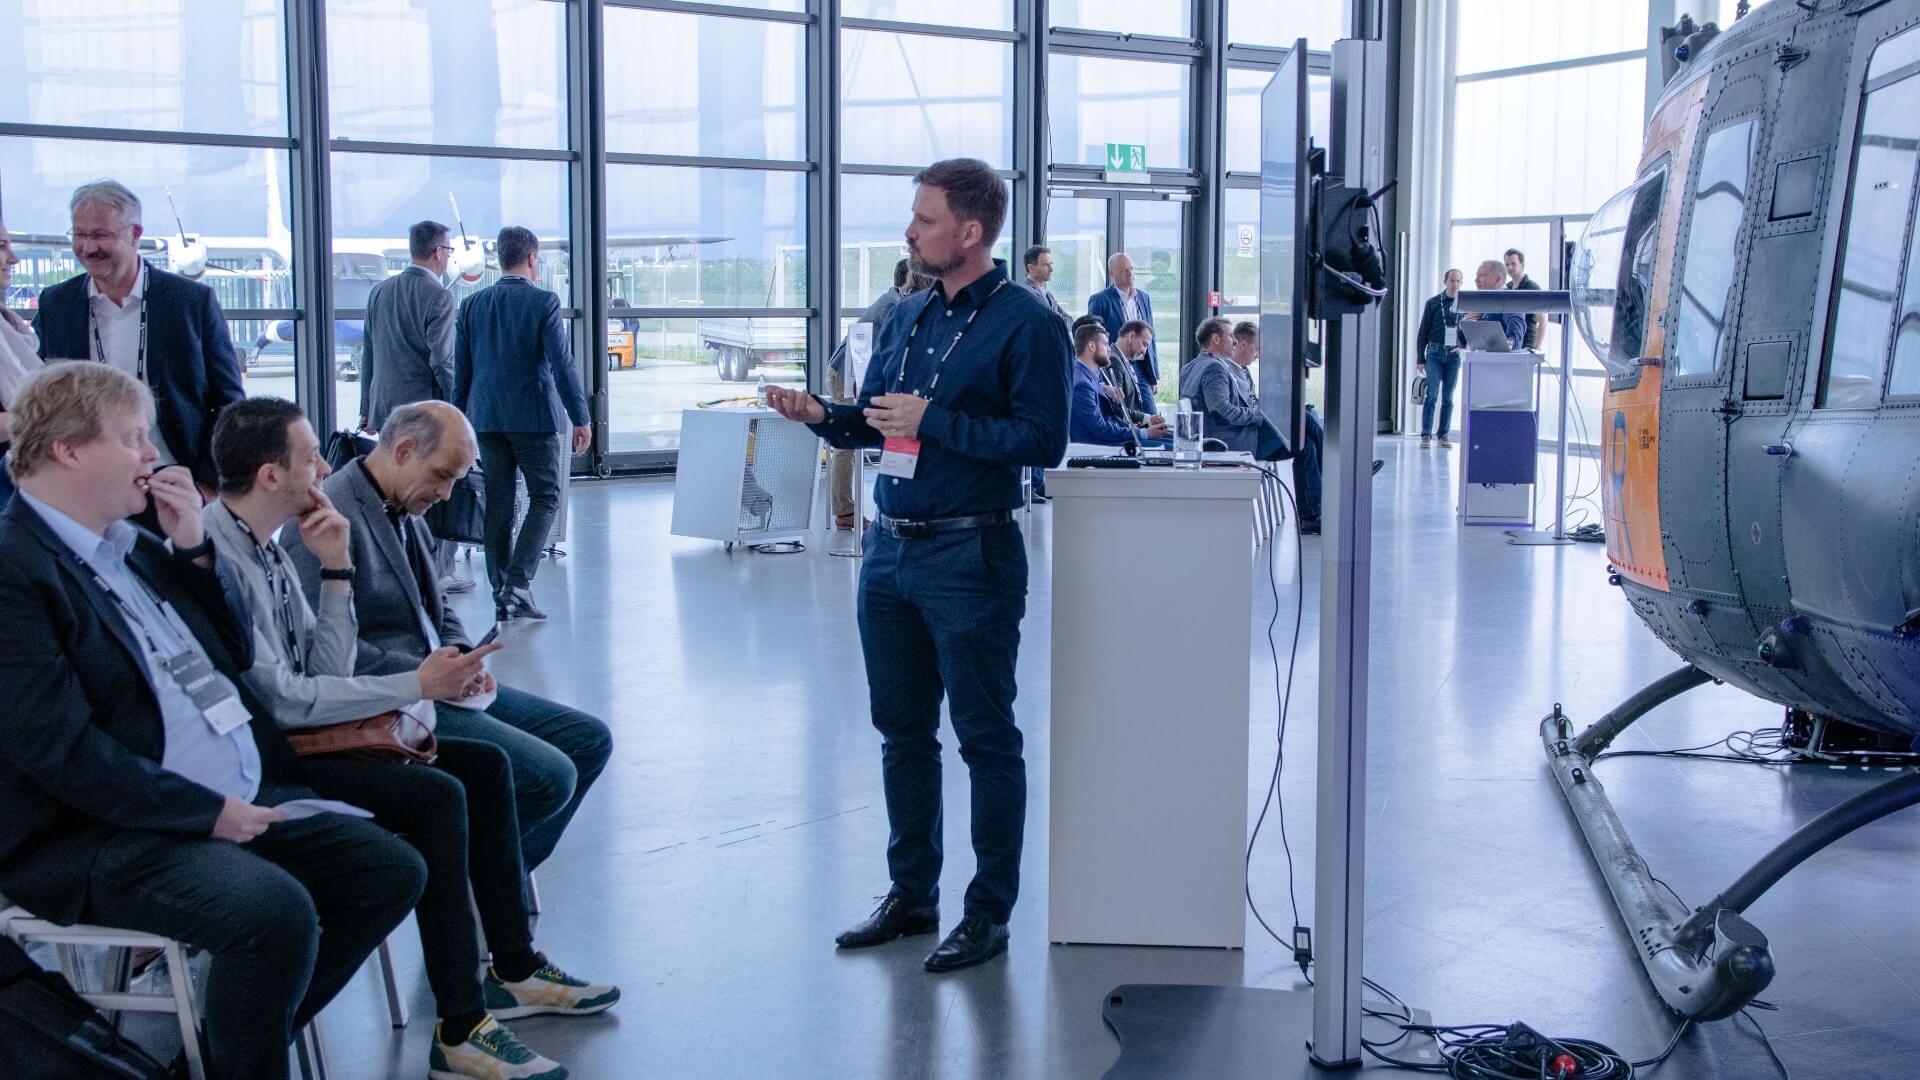 A member of STARTUP AUTOBAHN talking in front of a helicopter in a hall